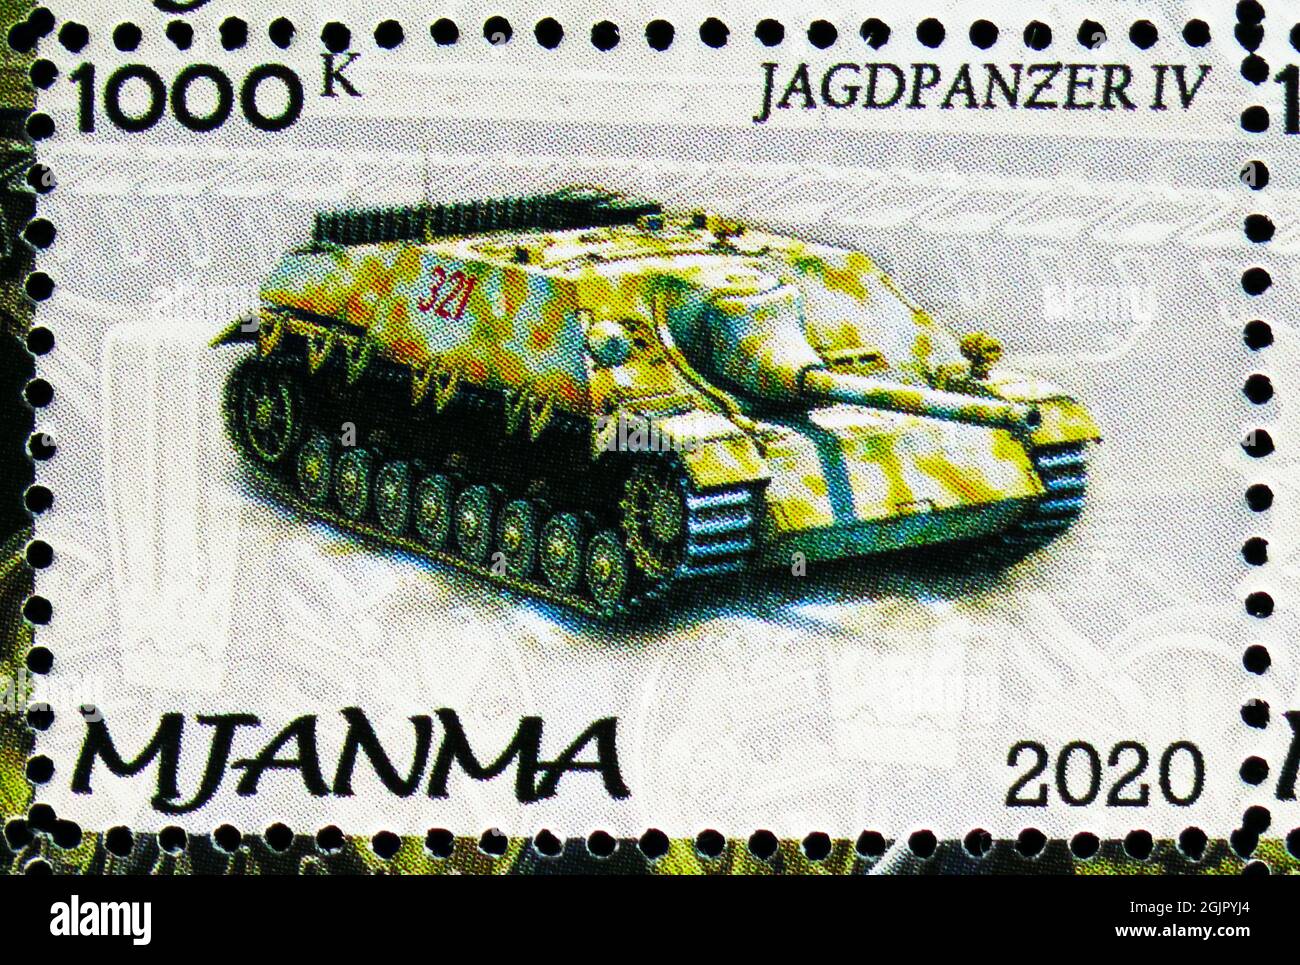 MOSCOW, RUSSIA - APRIL 17, 2021: Postage stamp printed in Cinderellas shows JagdPanzer IV, Myanmar serie, circa 2020 Stock Photo